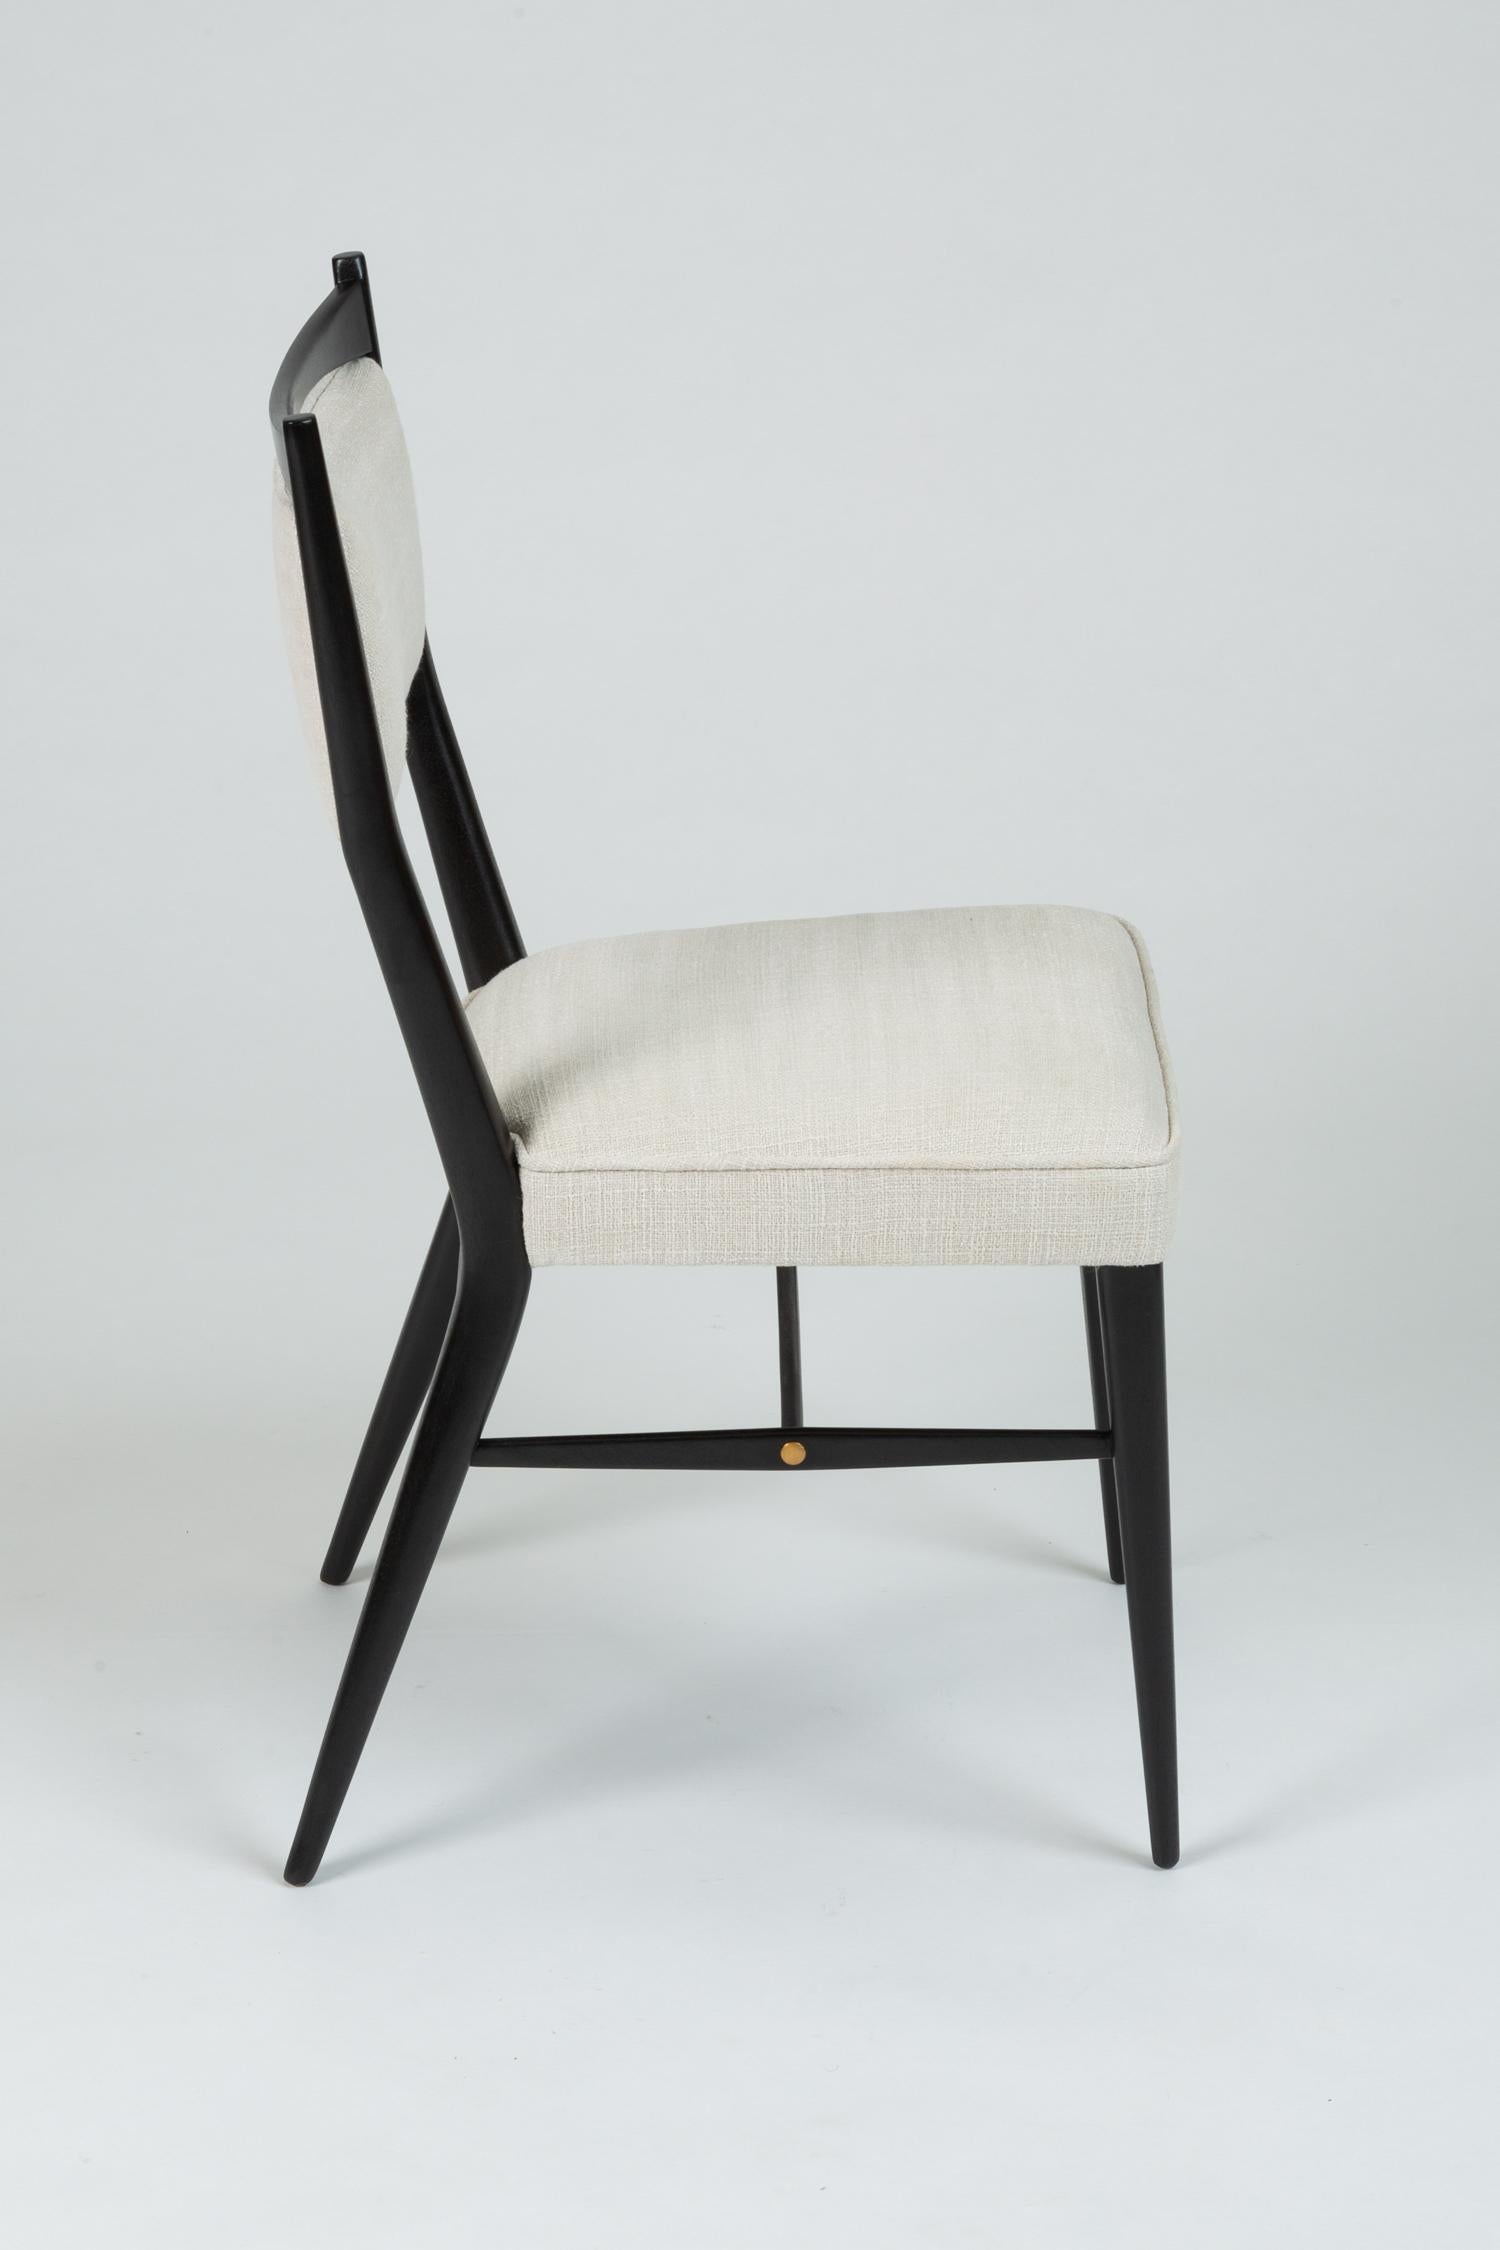 Textile Connoisseur Group Side Chair by Paul McCobb for H. Sacks and Sons